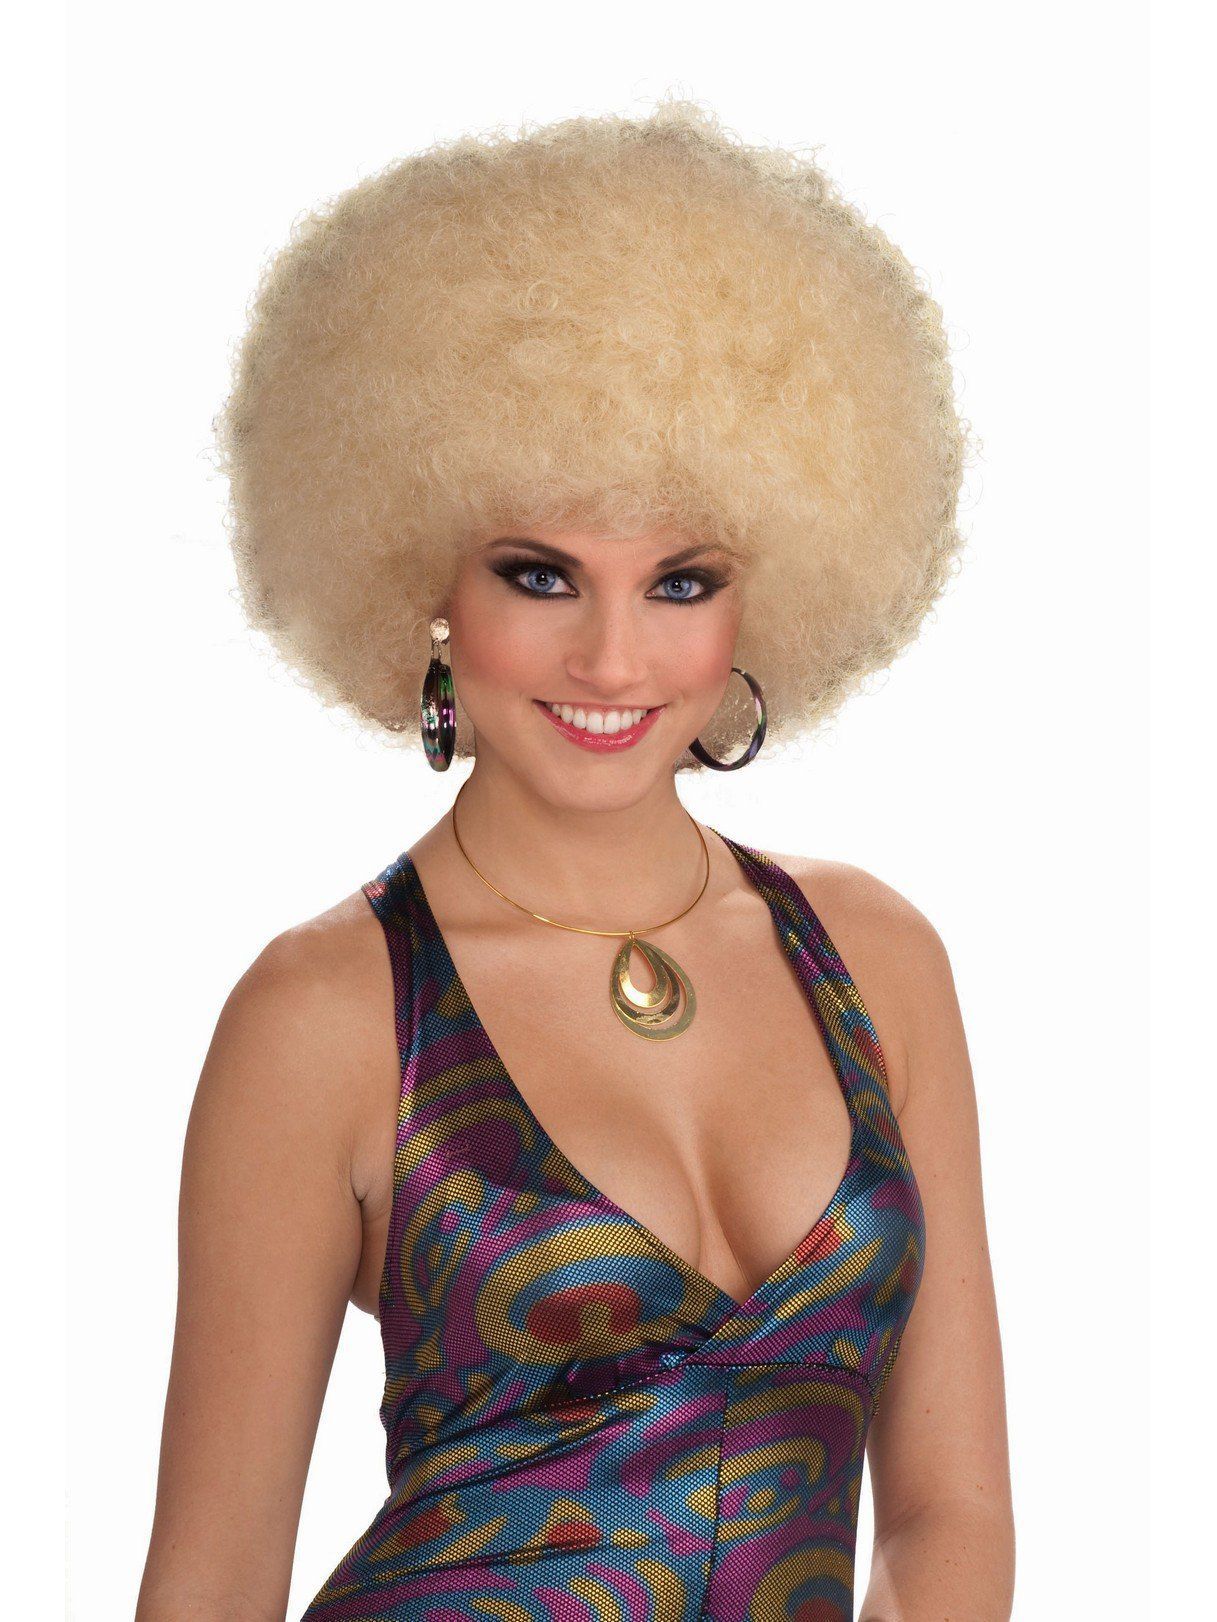 Adult Blonde Afro Wig - Deluxe - costumes.com